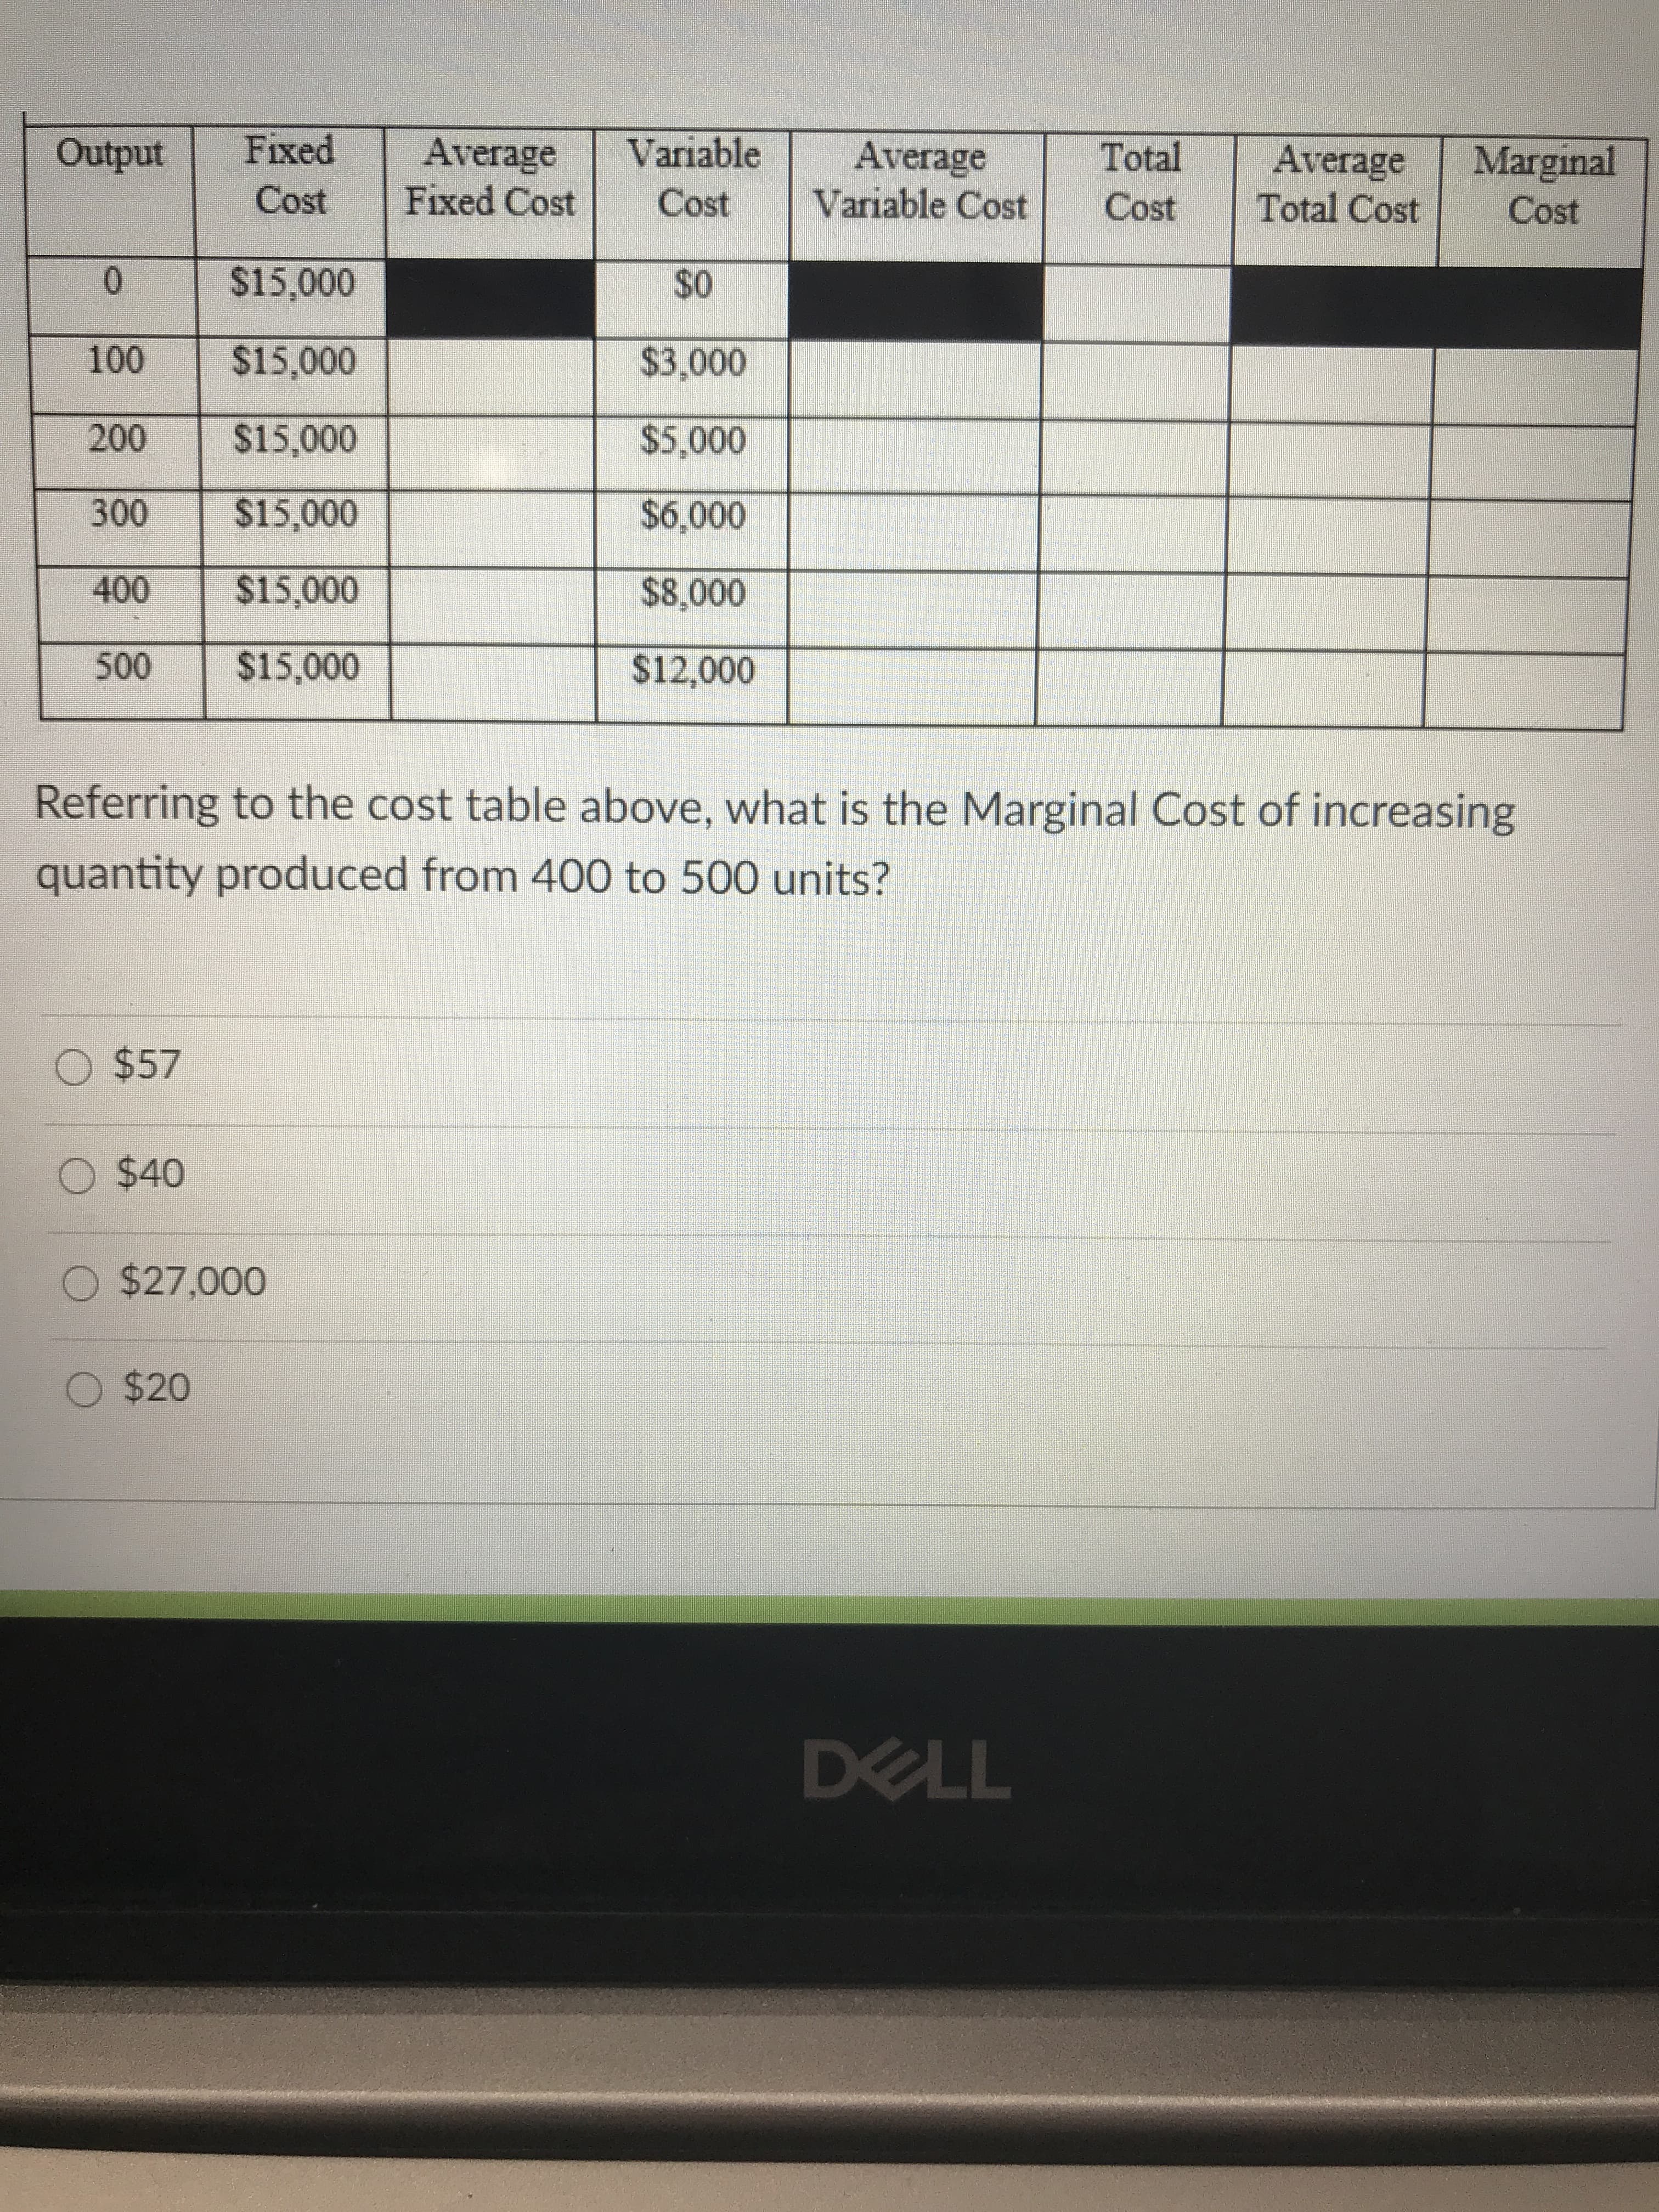 Referring to the cost table above, what is the Marginal Cost of increasing
quantity produced from 400 to 500 units?
